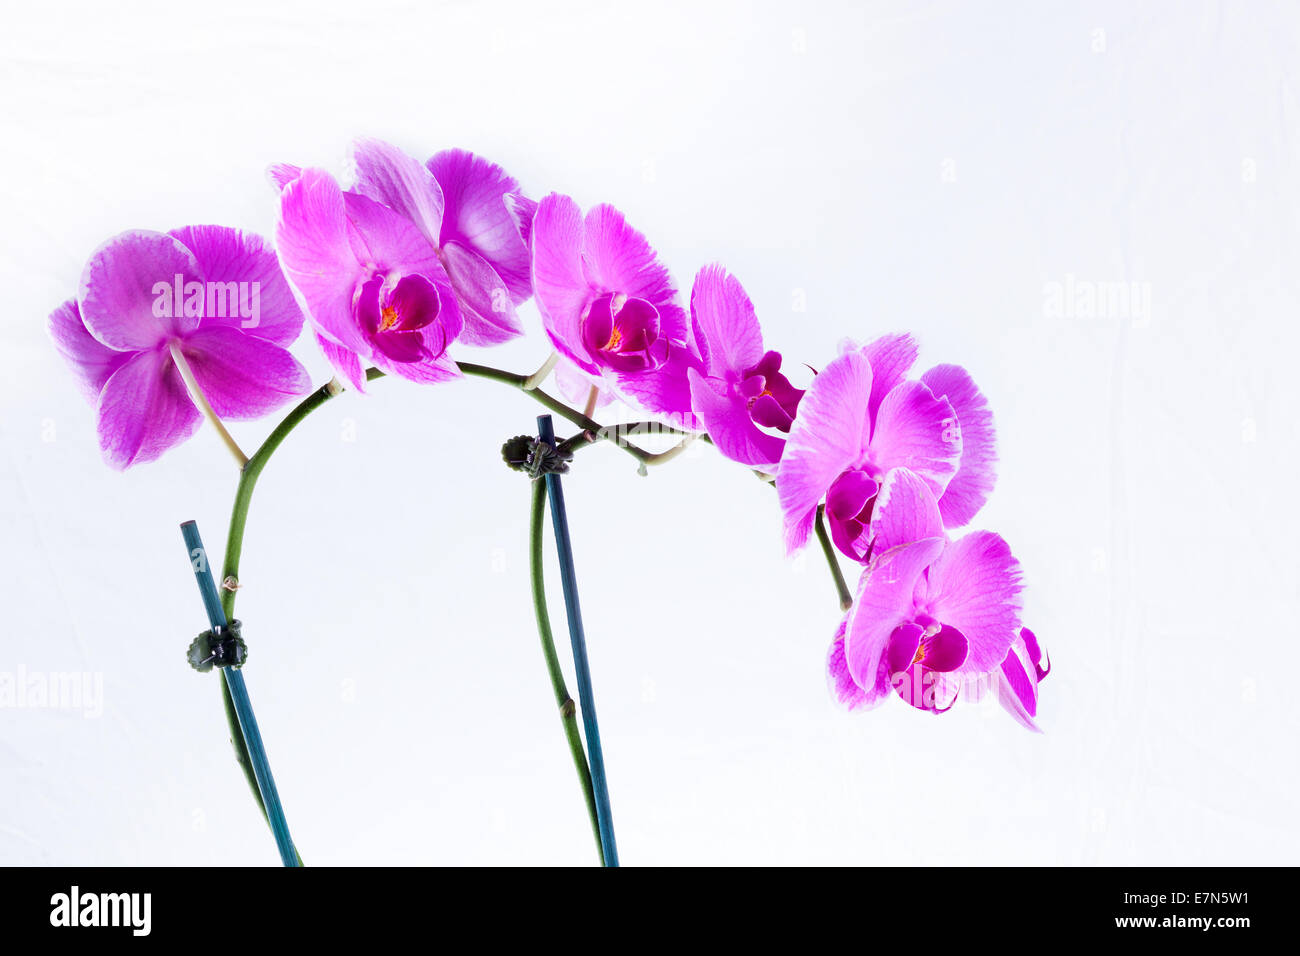 Moth orchid is a type of orchid flowers that are commonly found in florist shops and grocery stores. They bloom in different sha Stock Photo